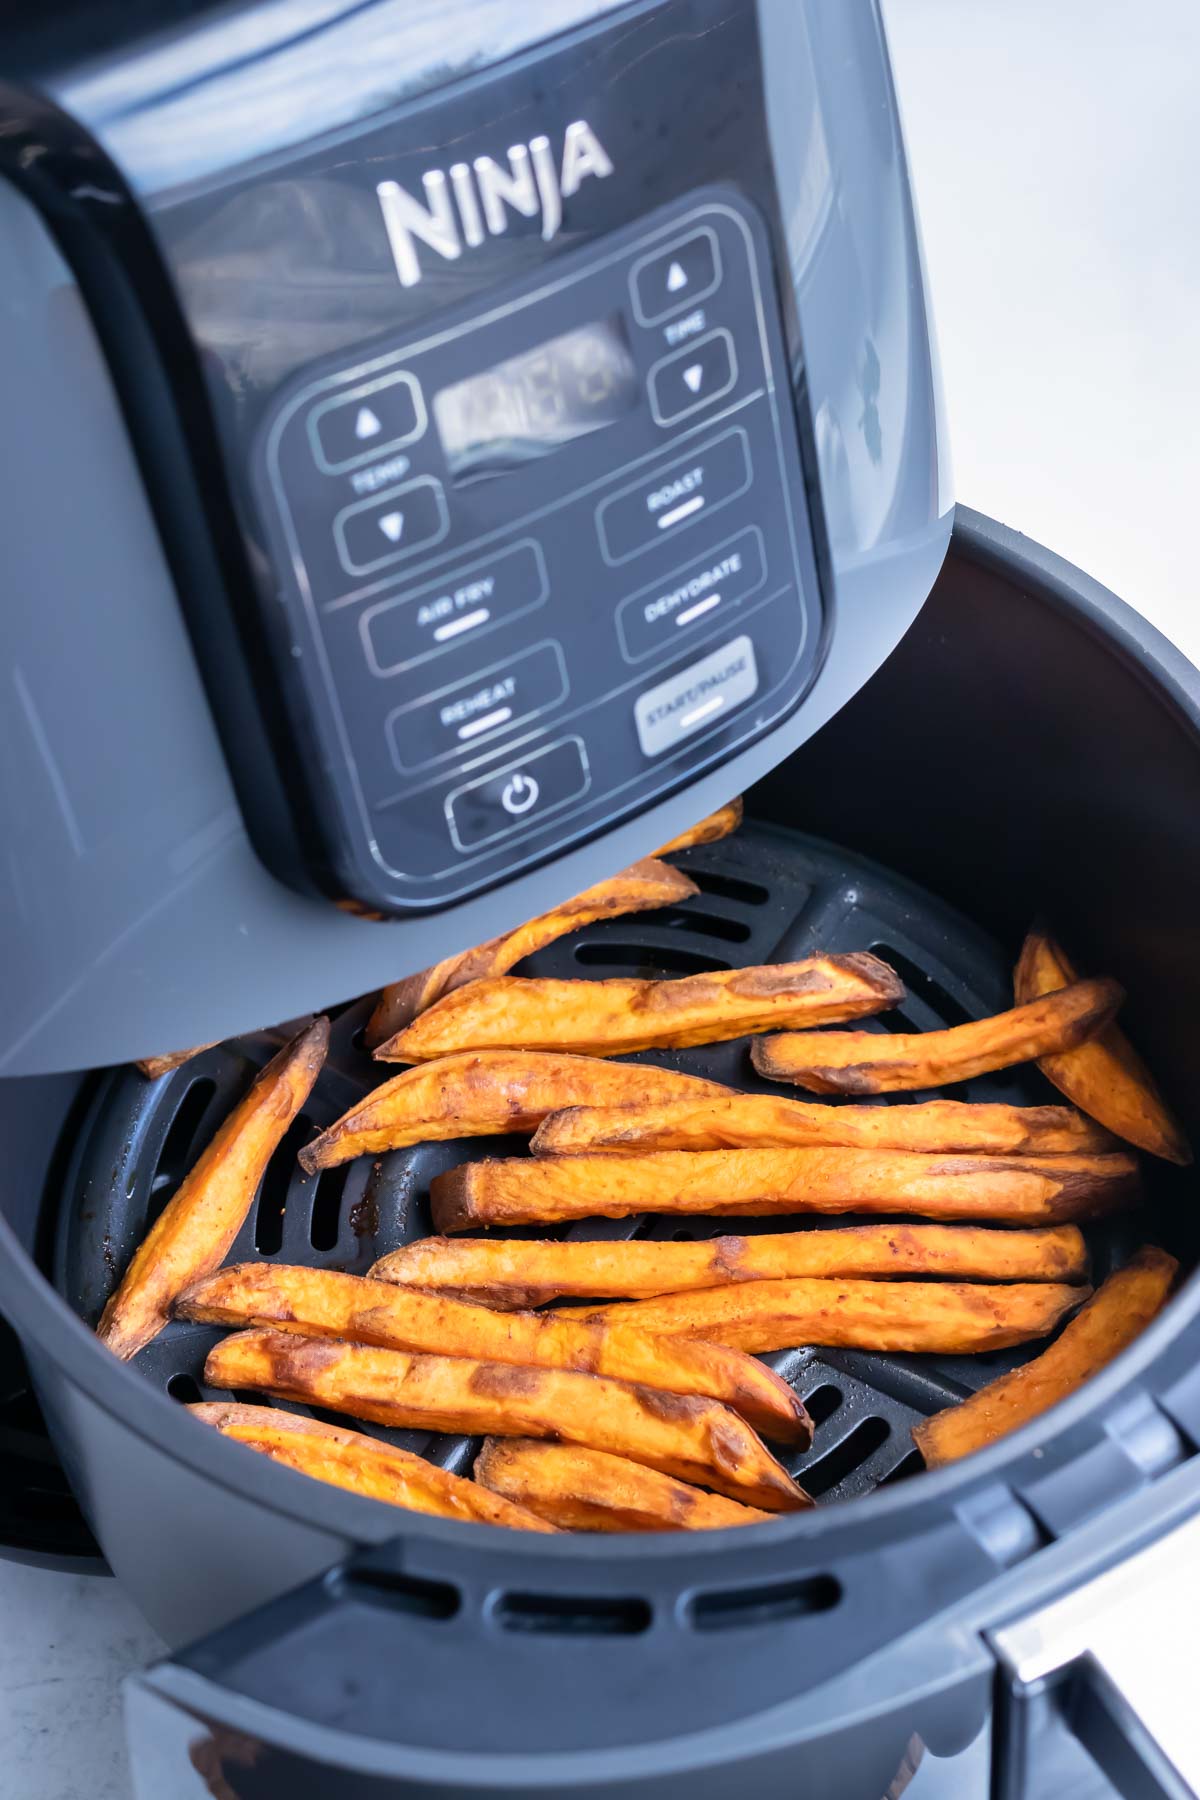 Sweet potato fries are placed in an air fryer.